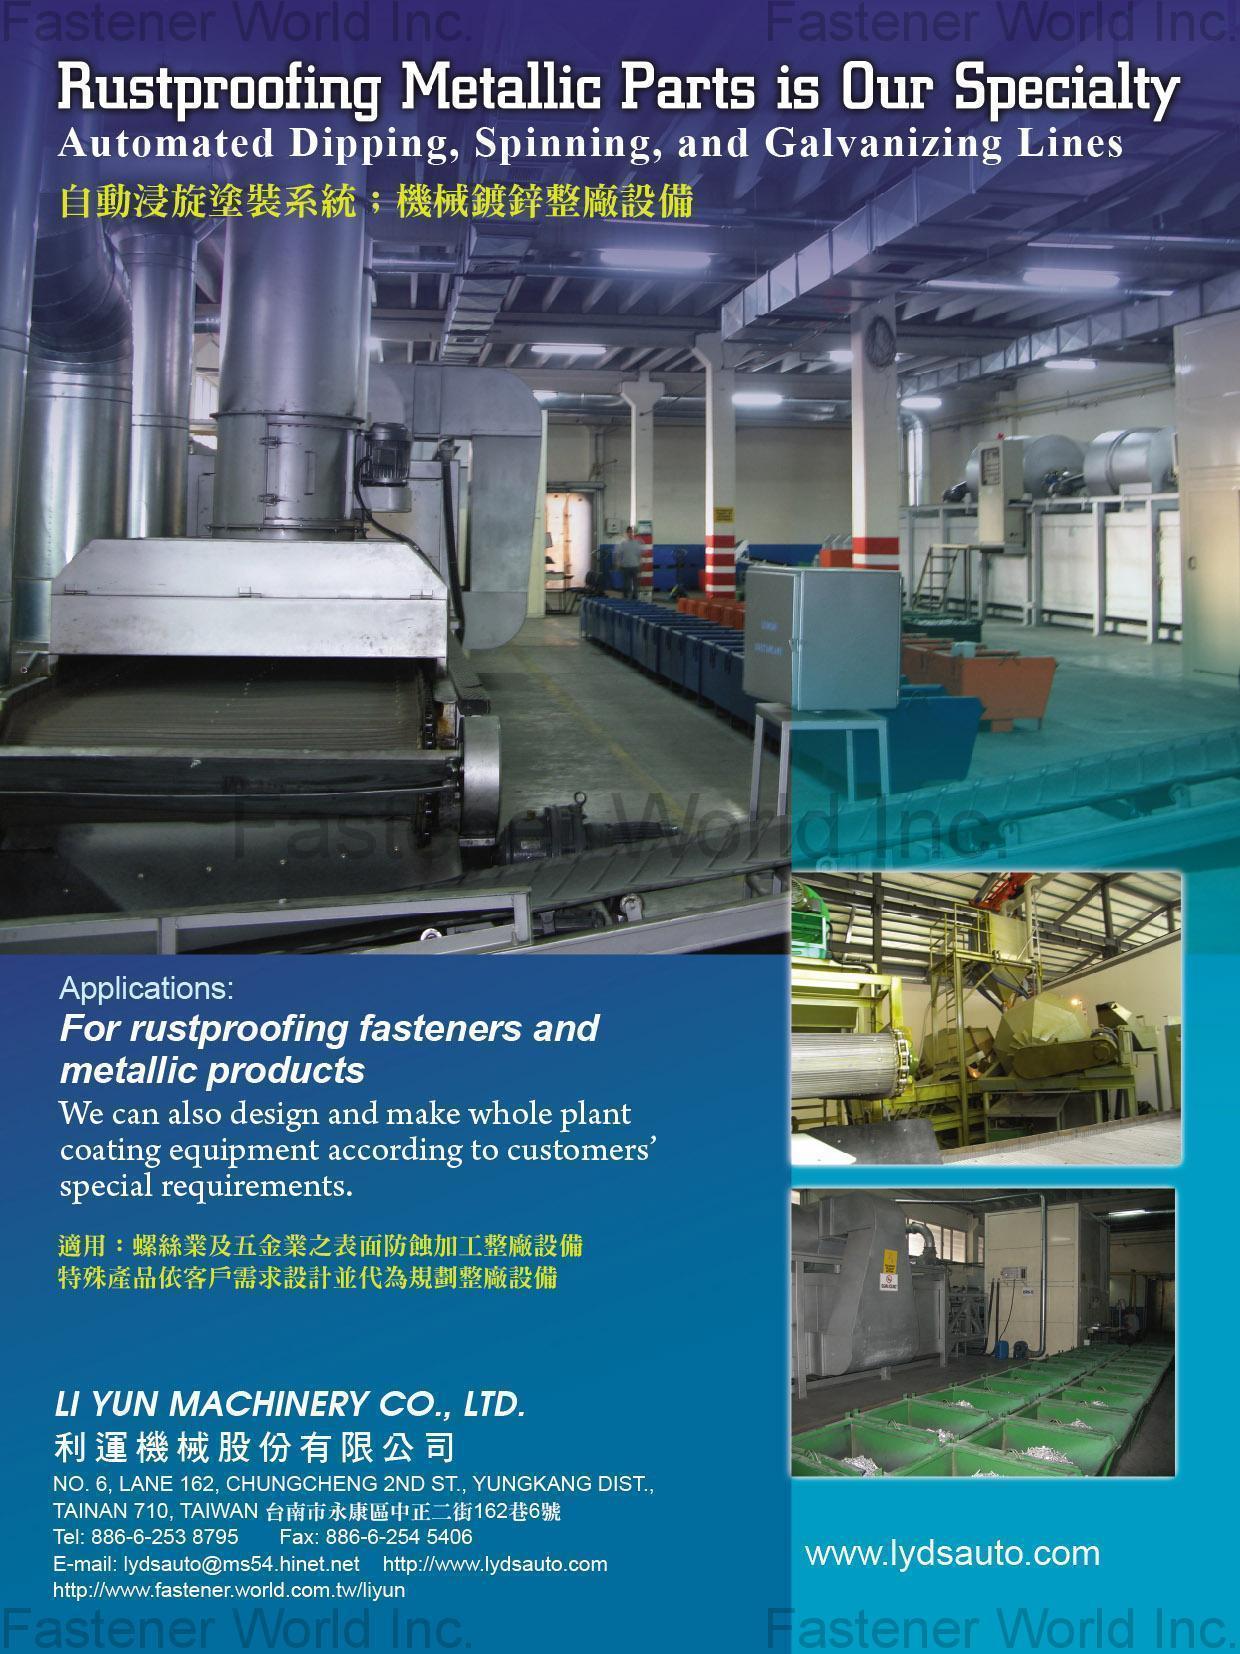 LI YUN MACHINERY CO., LTD. , Automatic Dip Spin Line, Mechanical Galvanizing Line, Hot Dip Galvanizing Line , Surface Treatment And Related Equipment